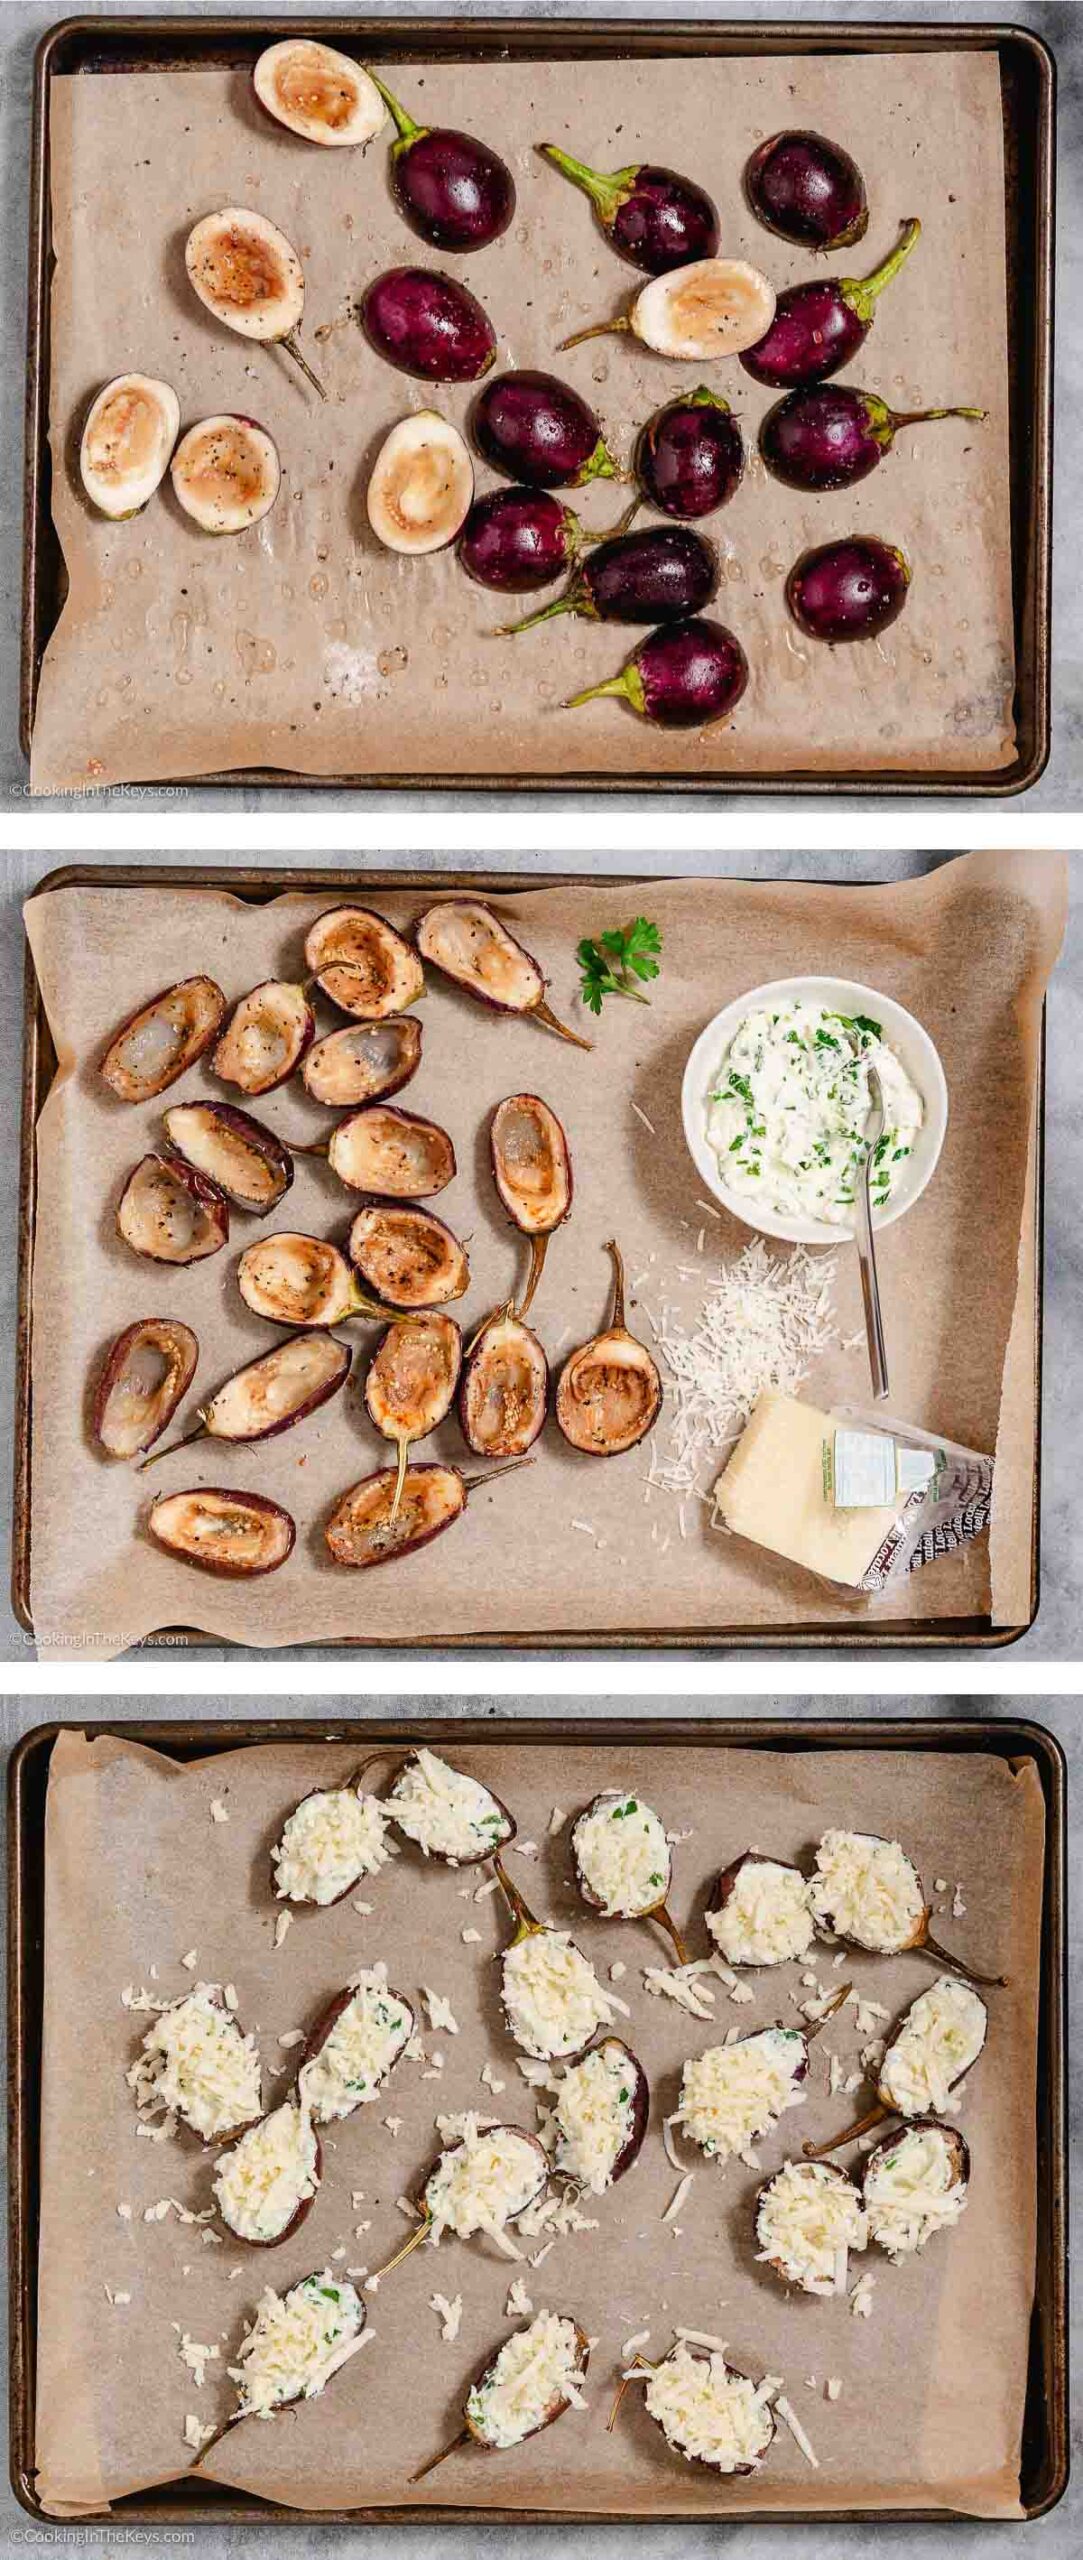 How to make baby eggplant parmesan step-by-step images.